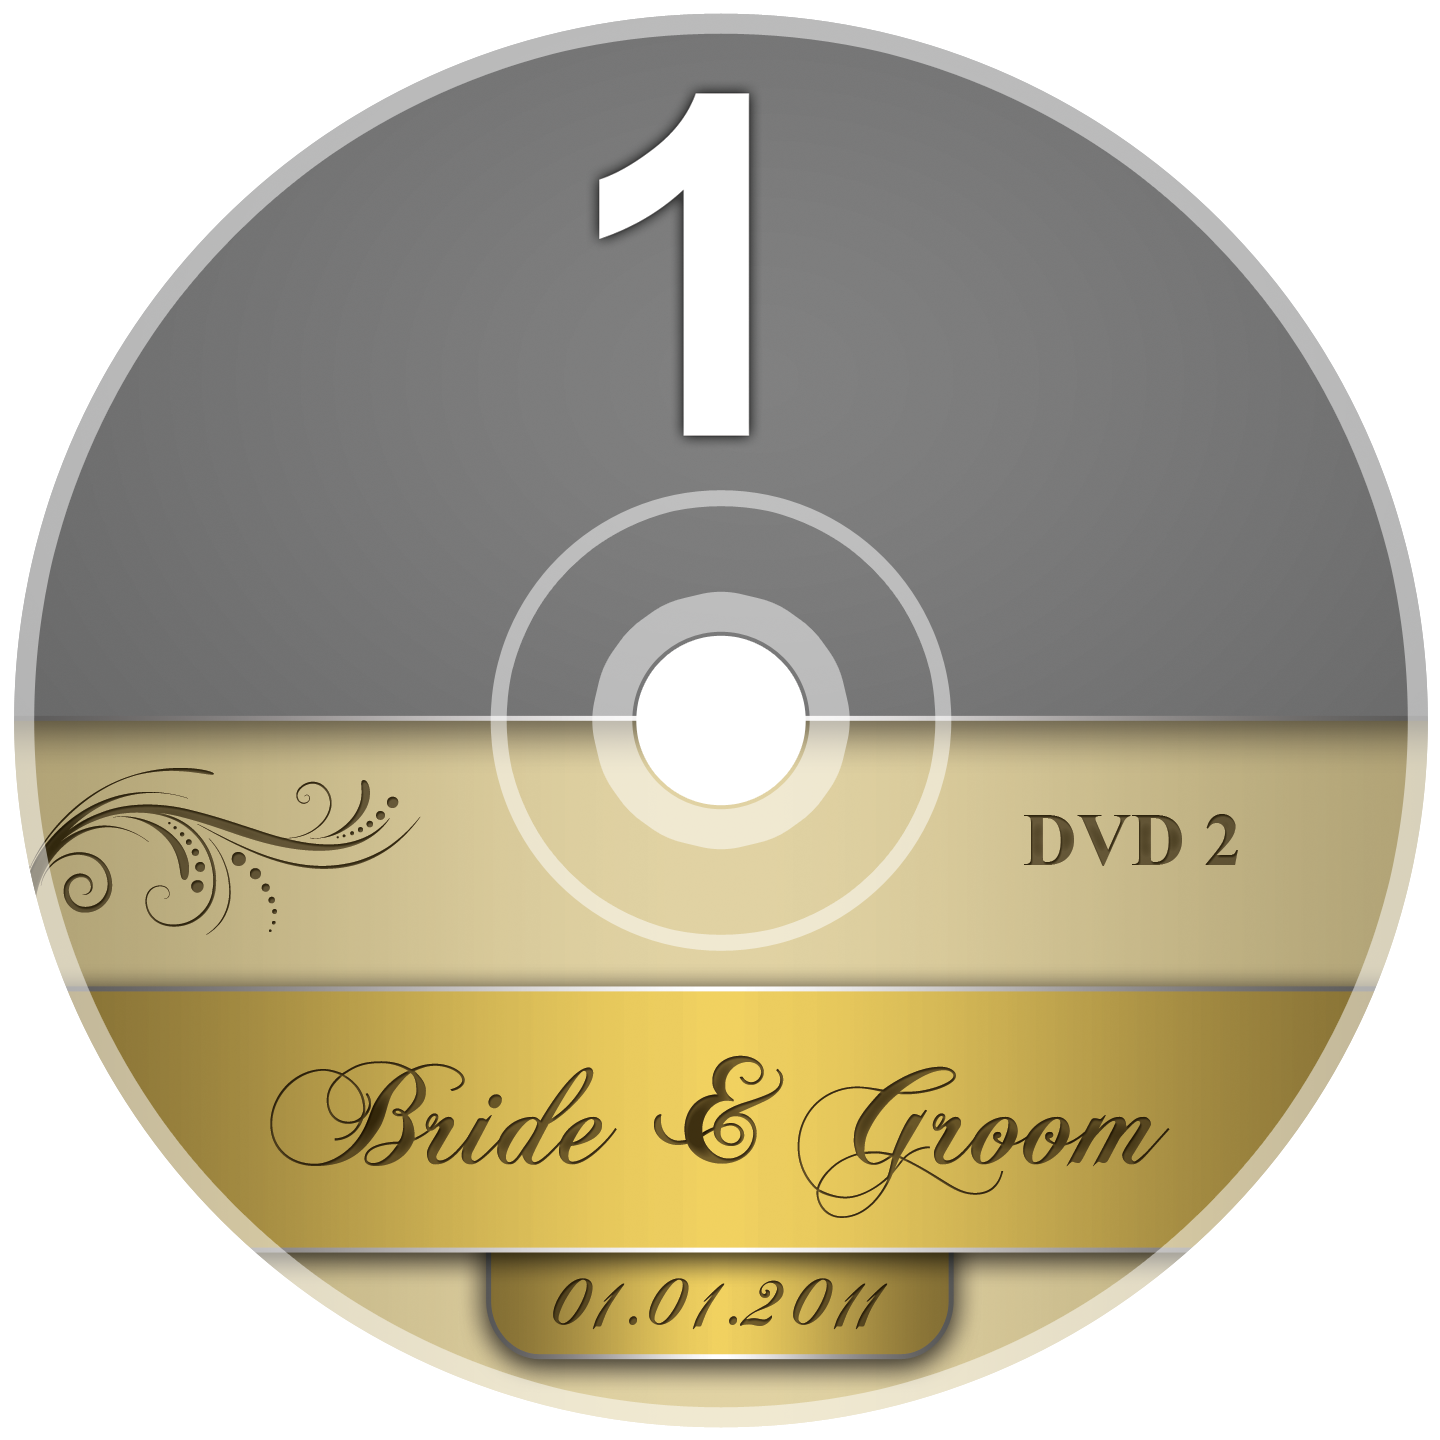 32 Dvd Label Templates, Birthday Party DVD Cover And DVD Label 